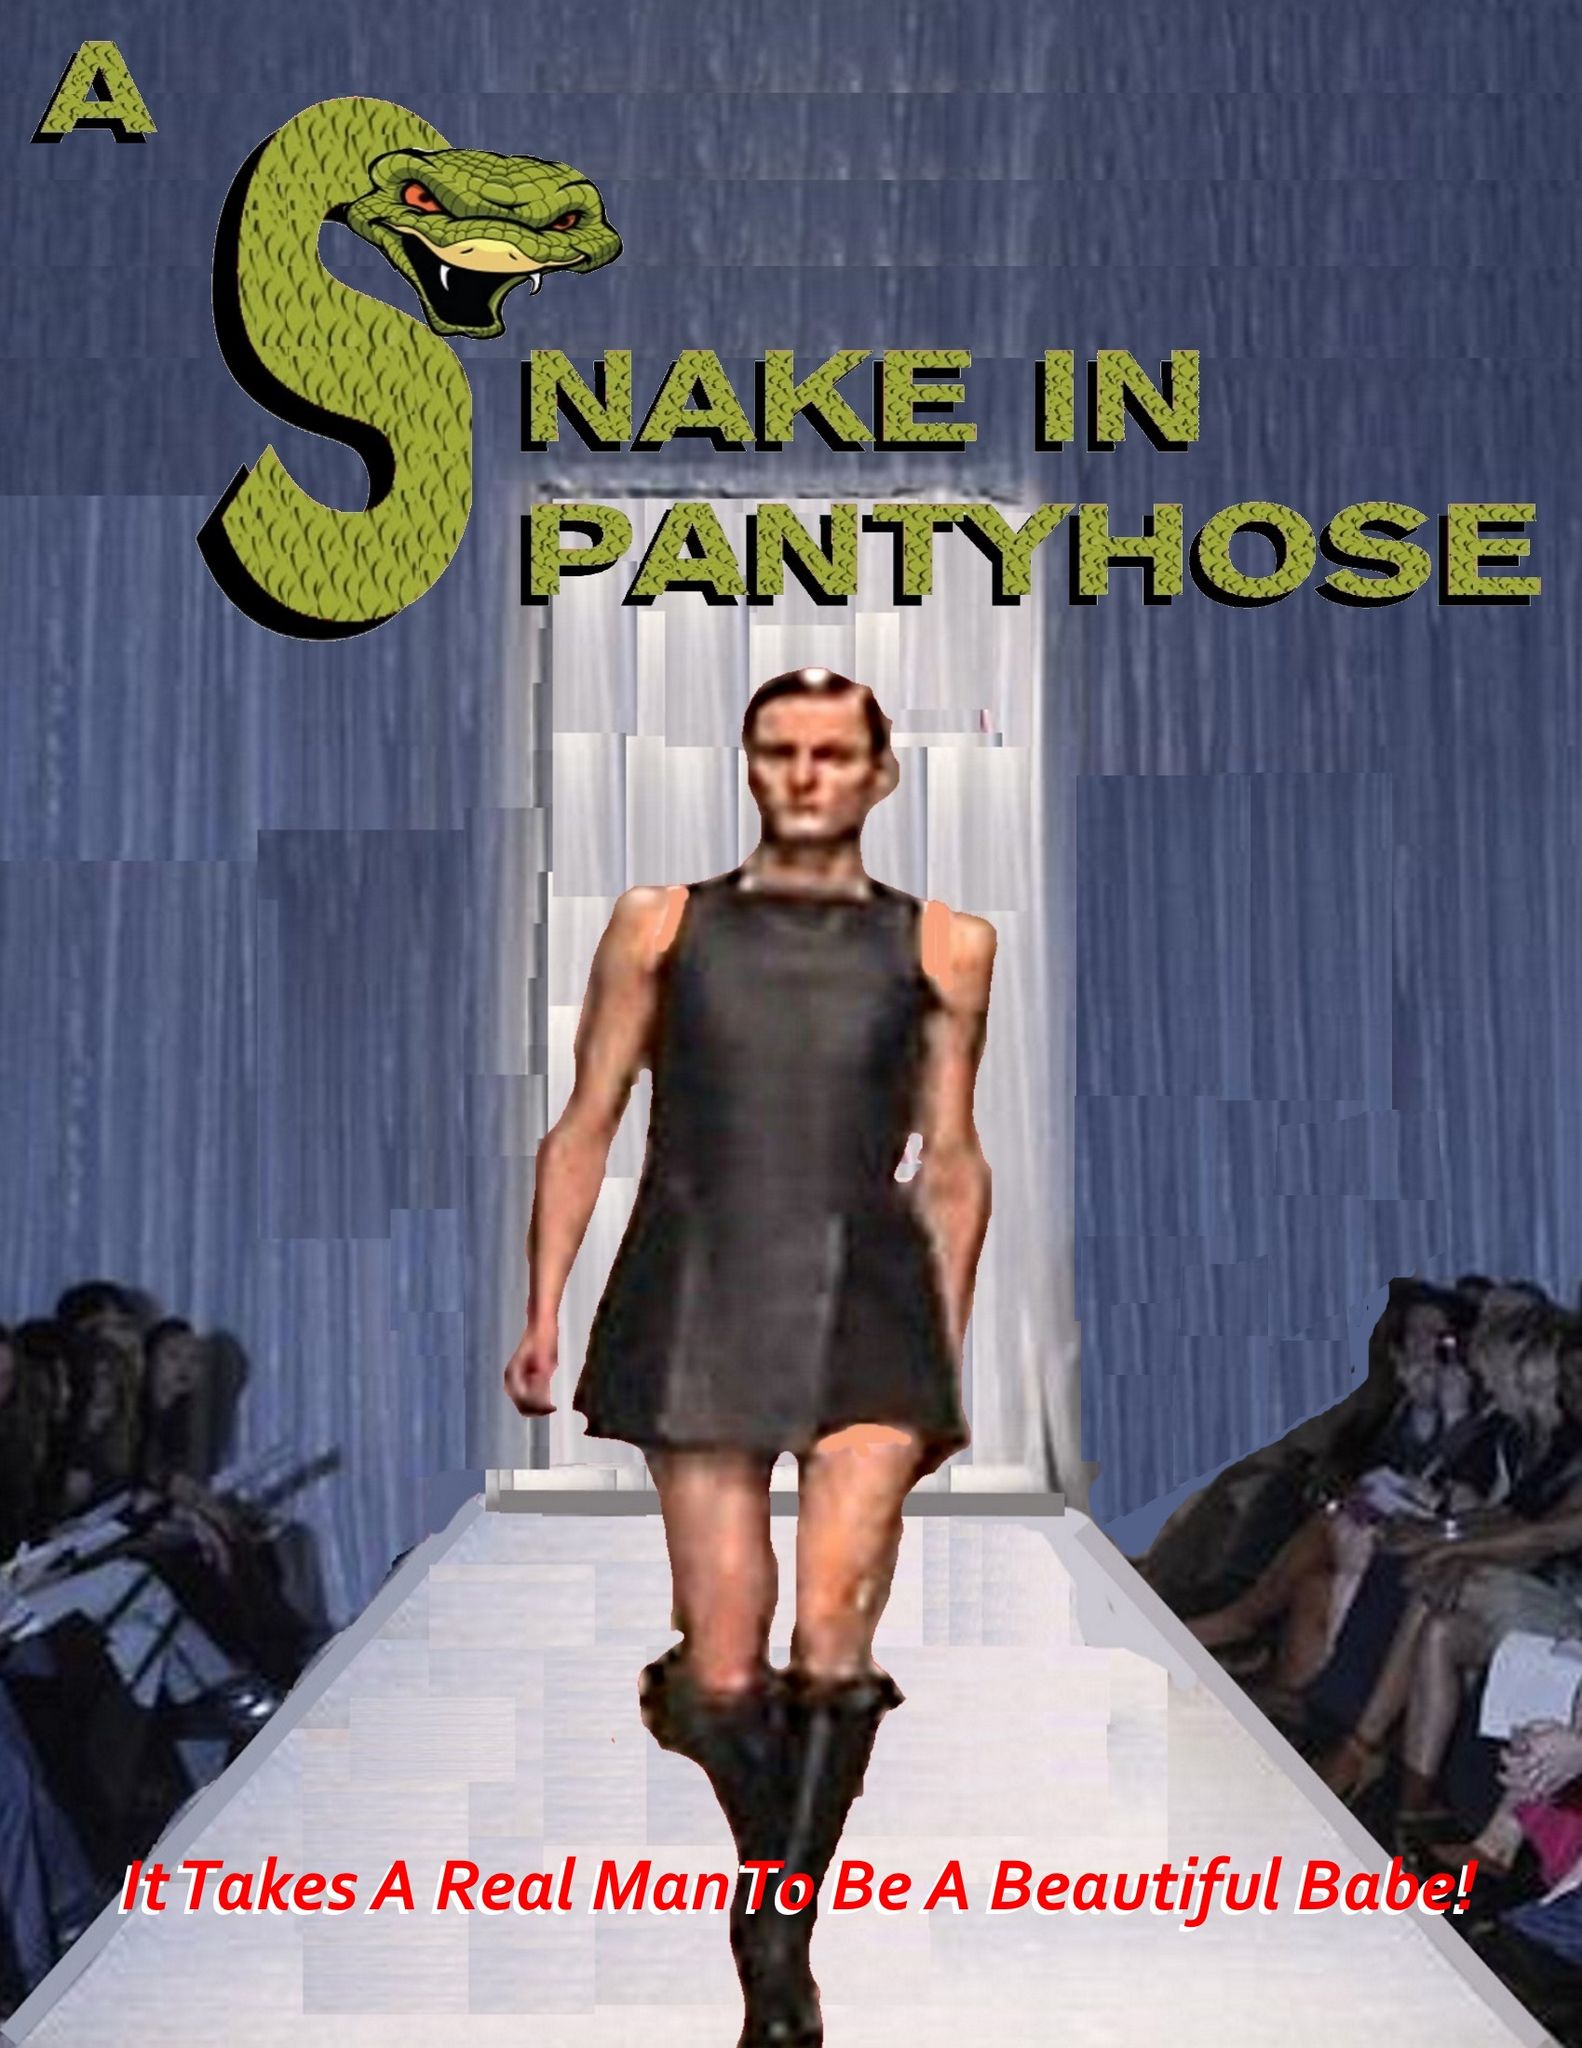 A SNAKE IN PANTYHOSE